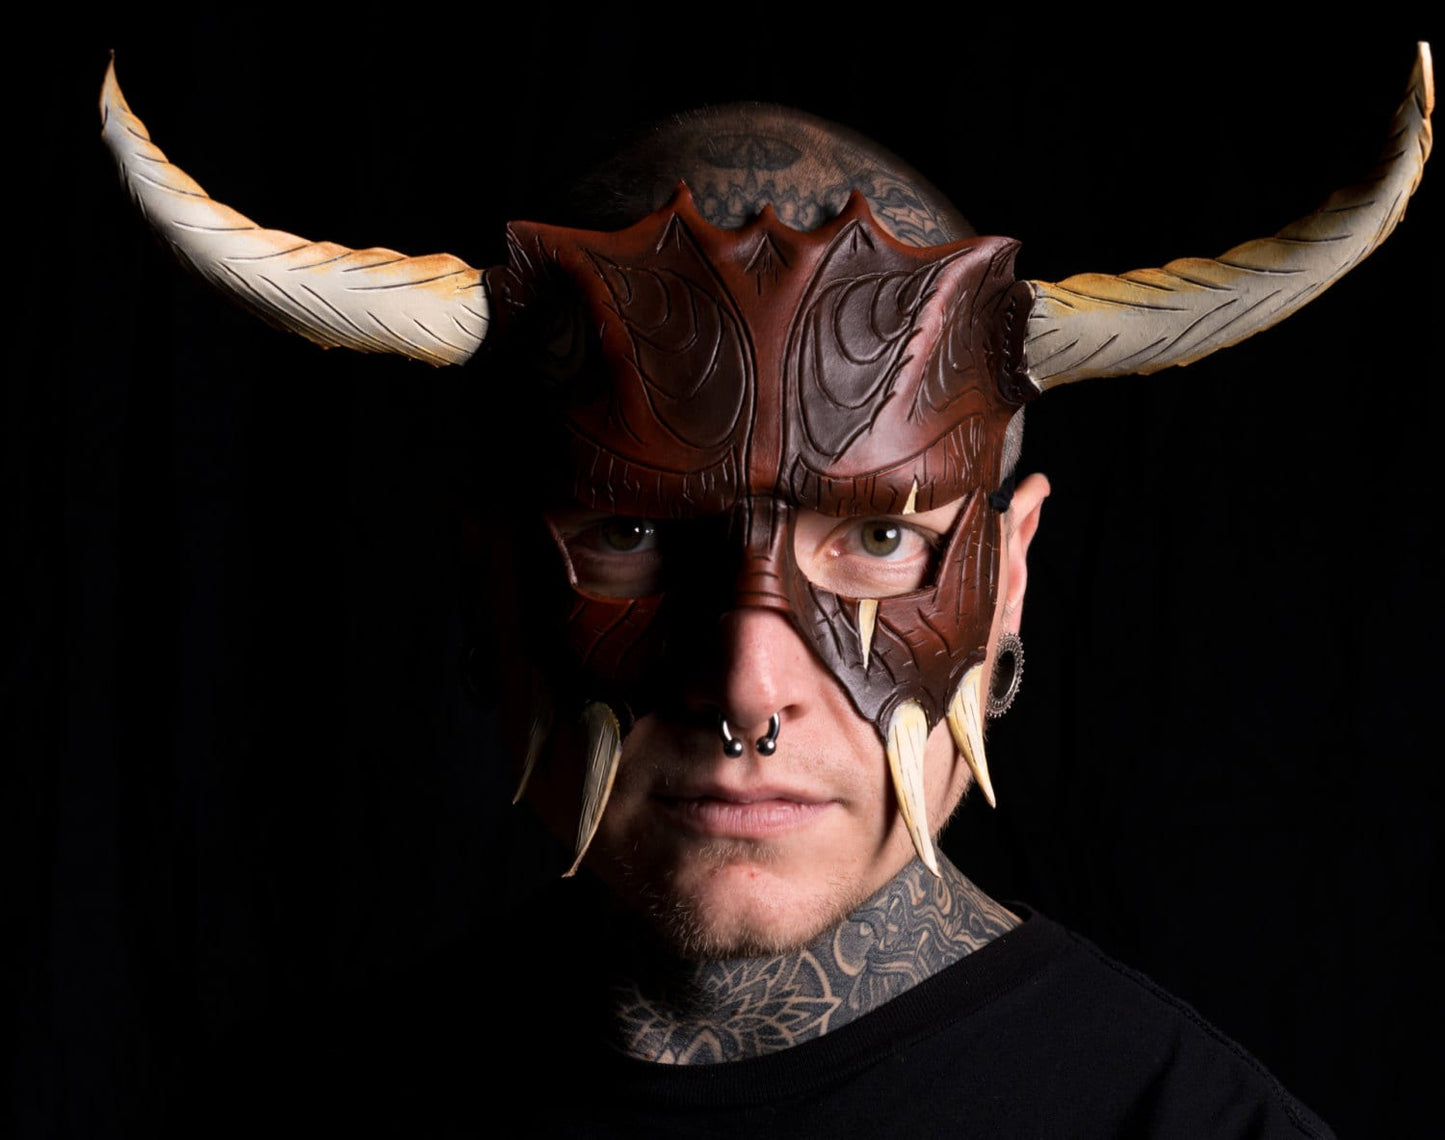 Handmade Genuine Leather Mask with Horns in Natural Colors - The Horned Beast